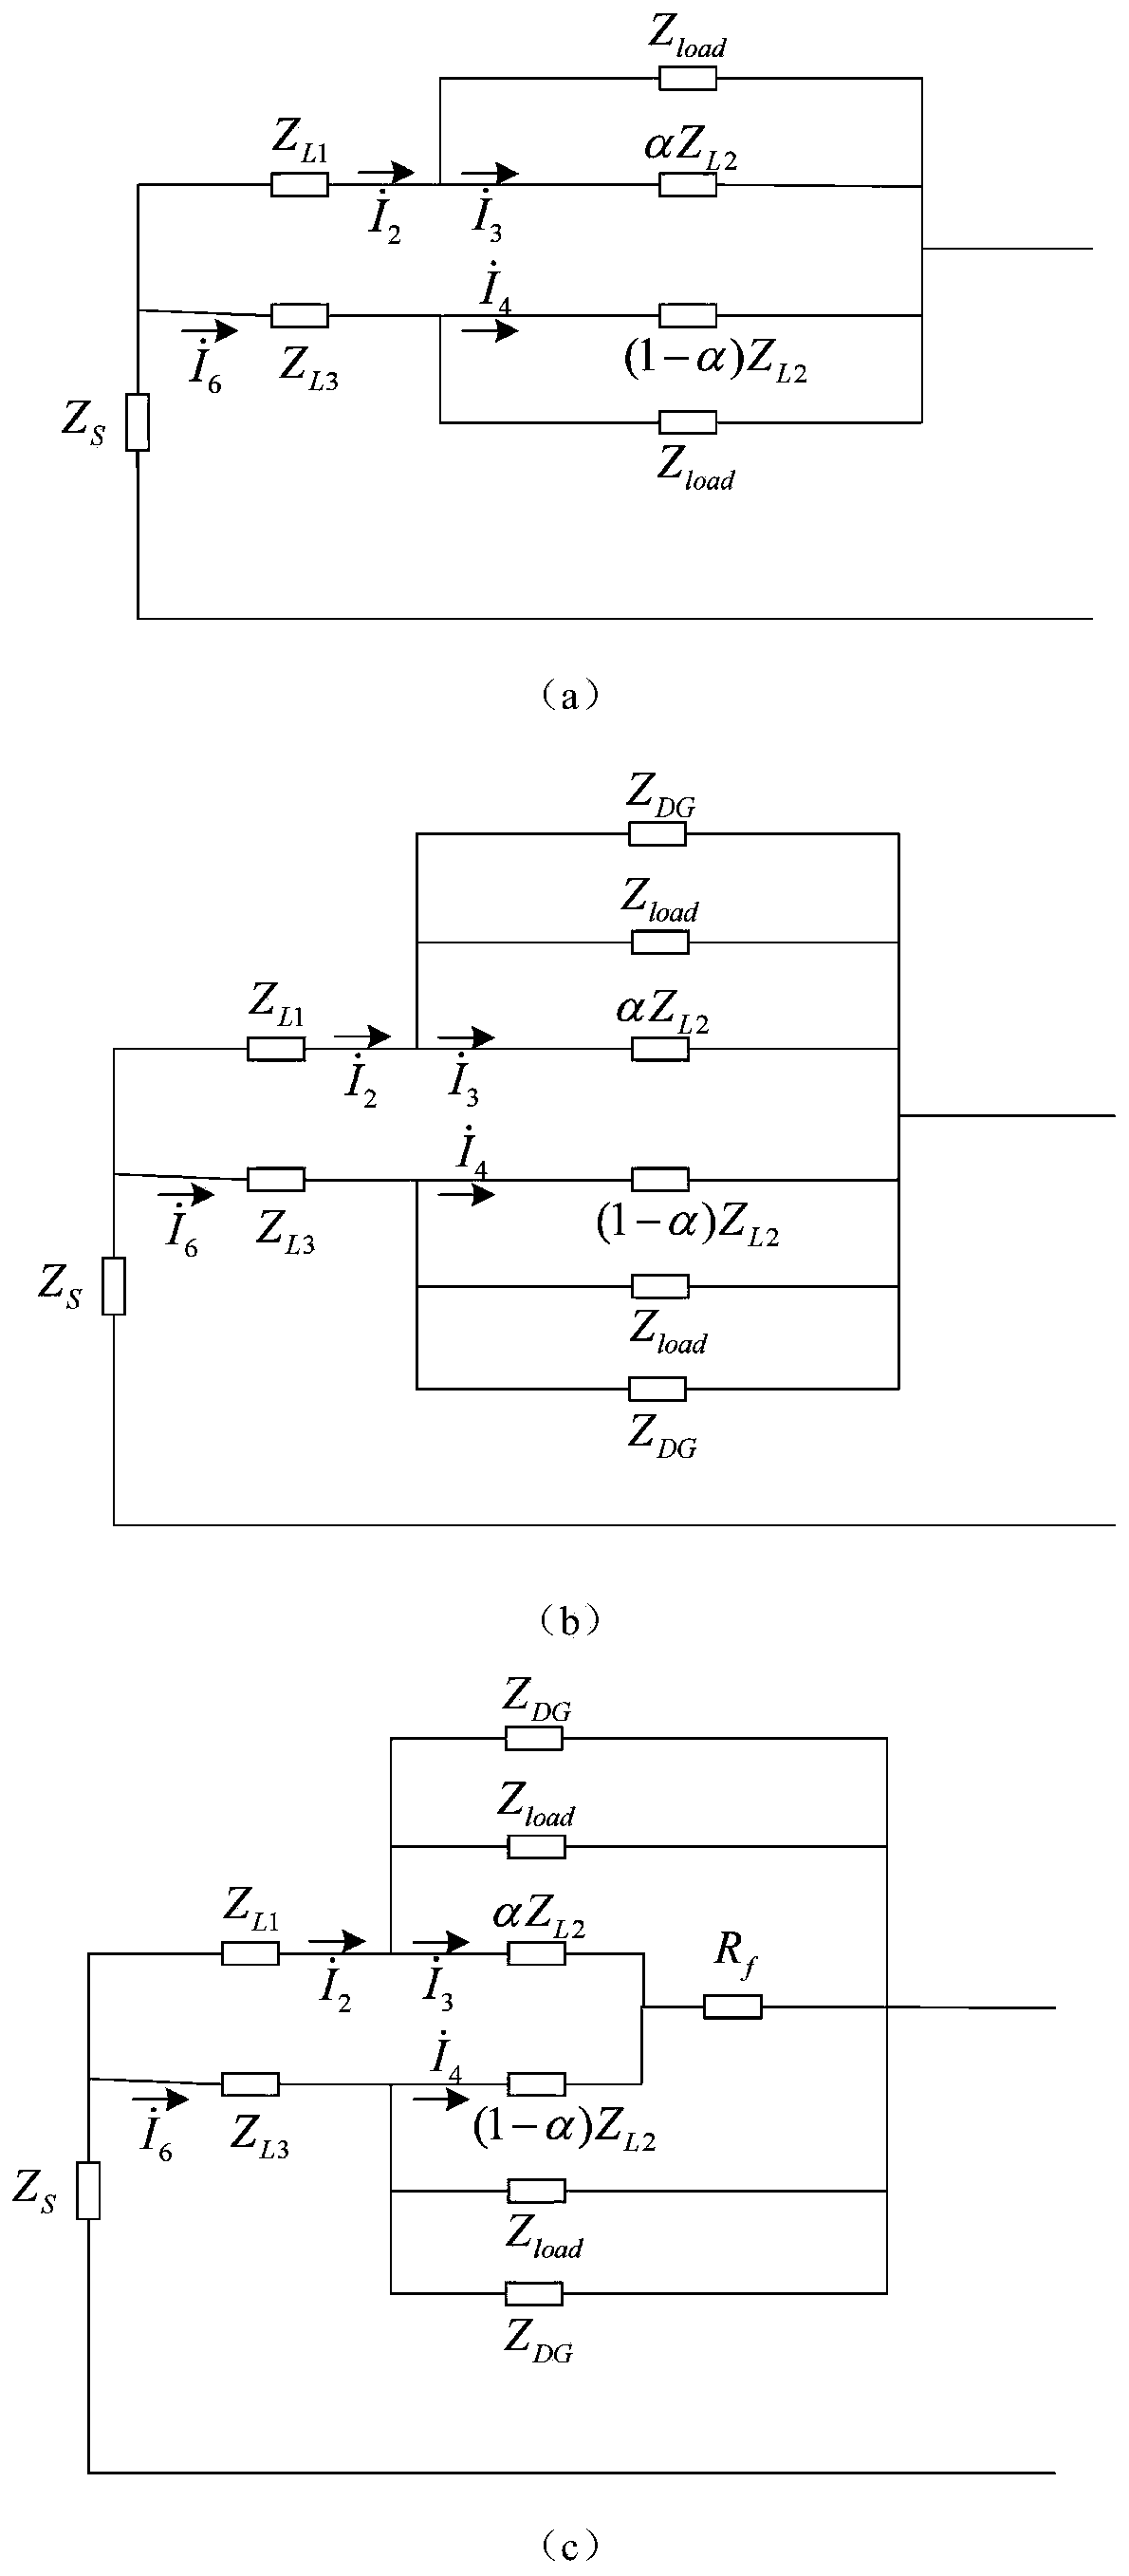 Petal type urban power grid grounding fault accurate positioning method based on multi-line zero-sequence current information